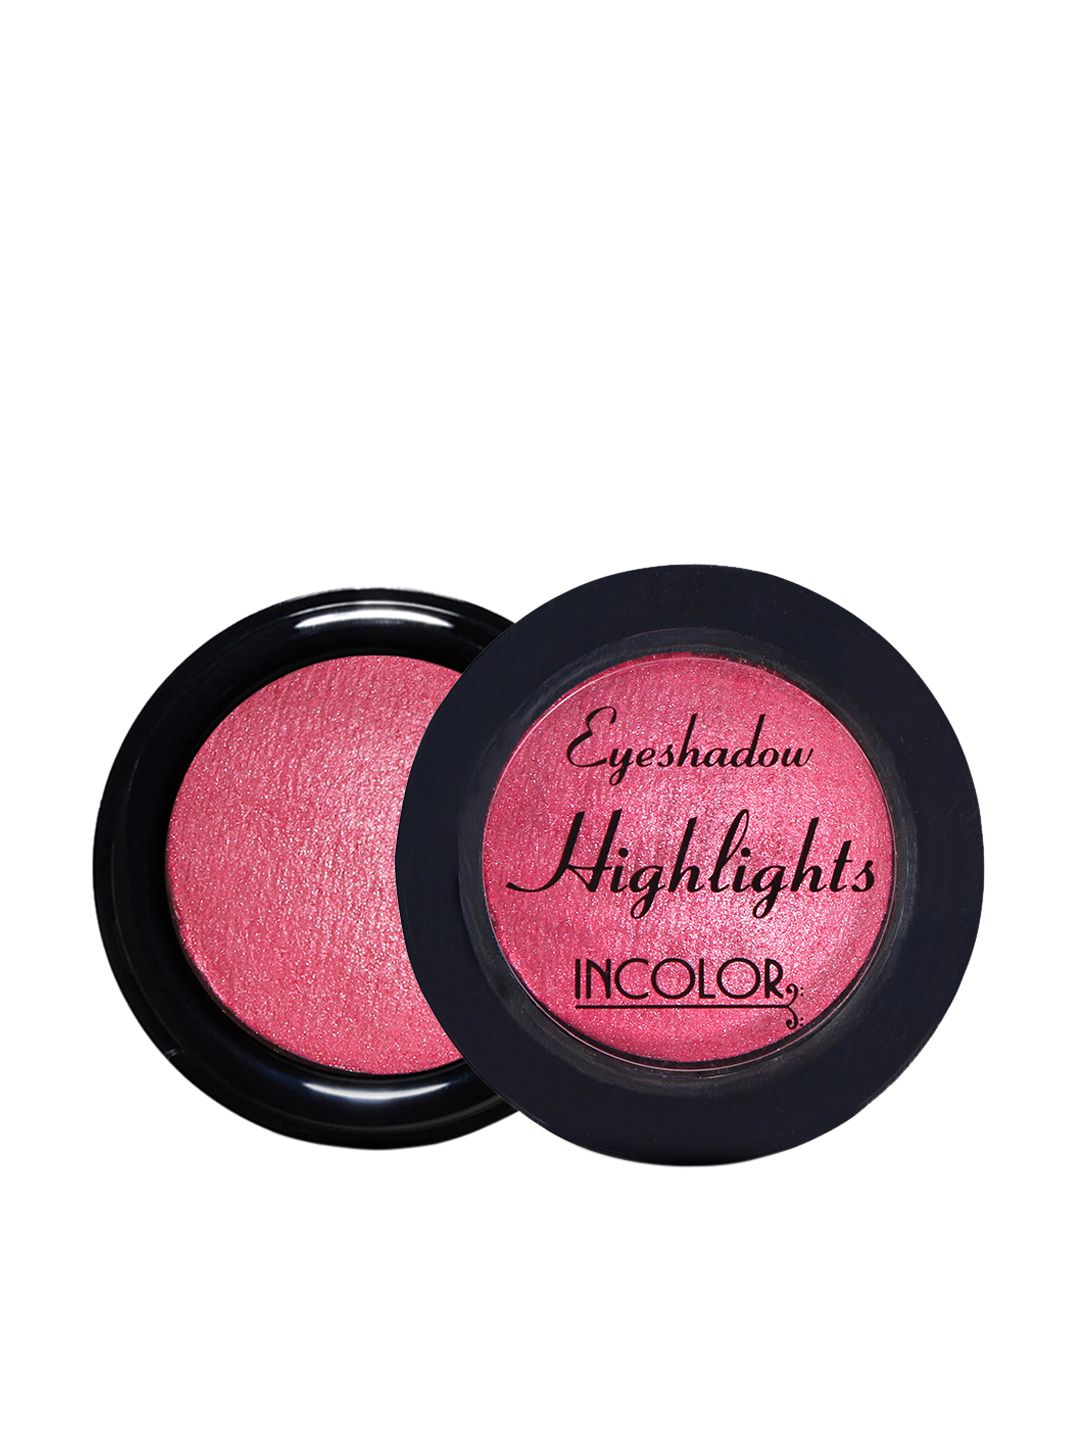 INCOLOR Highlighter Eyeshadow Pink - 25 4.5 g Price in India